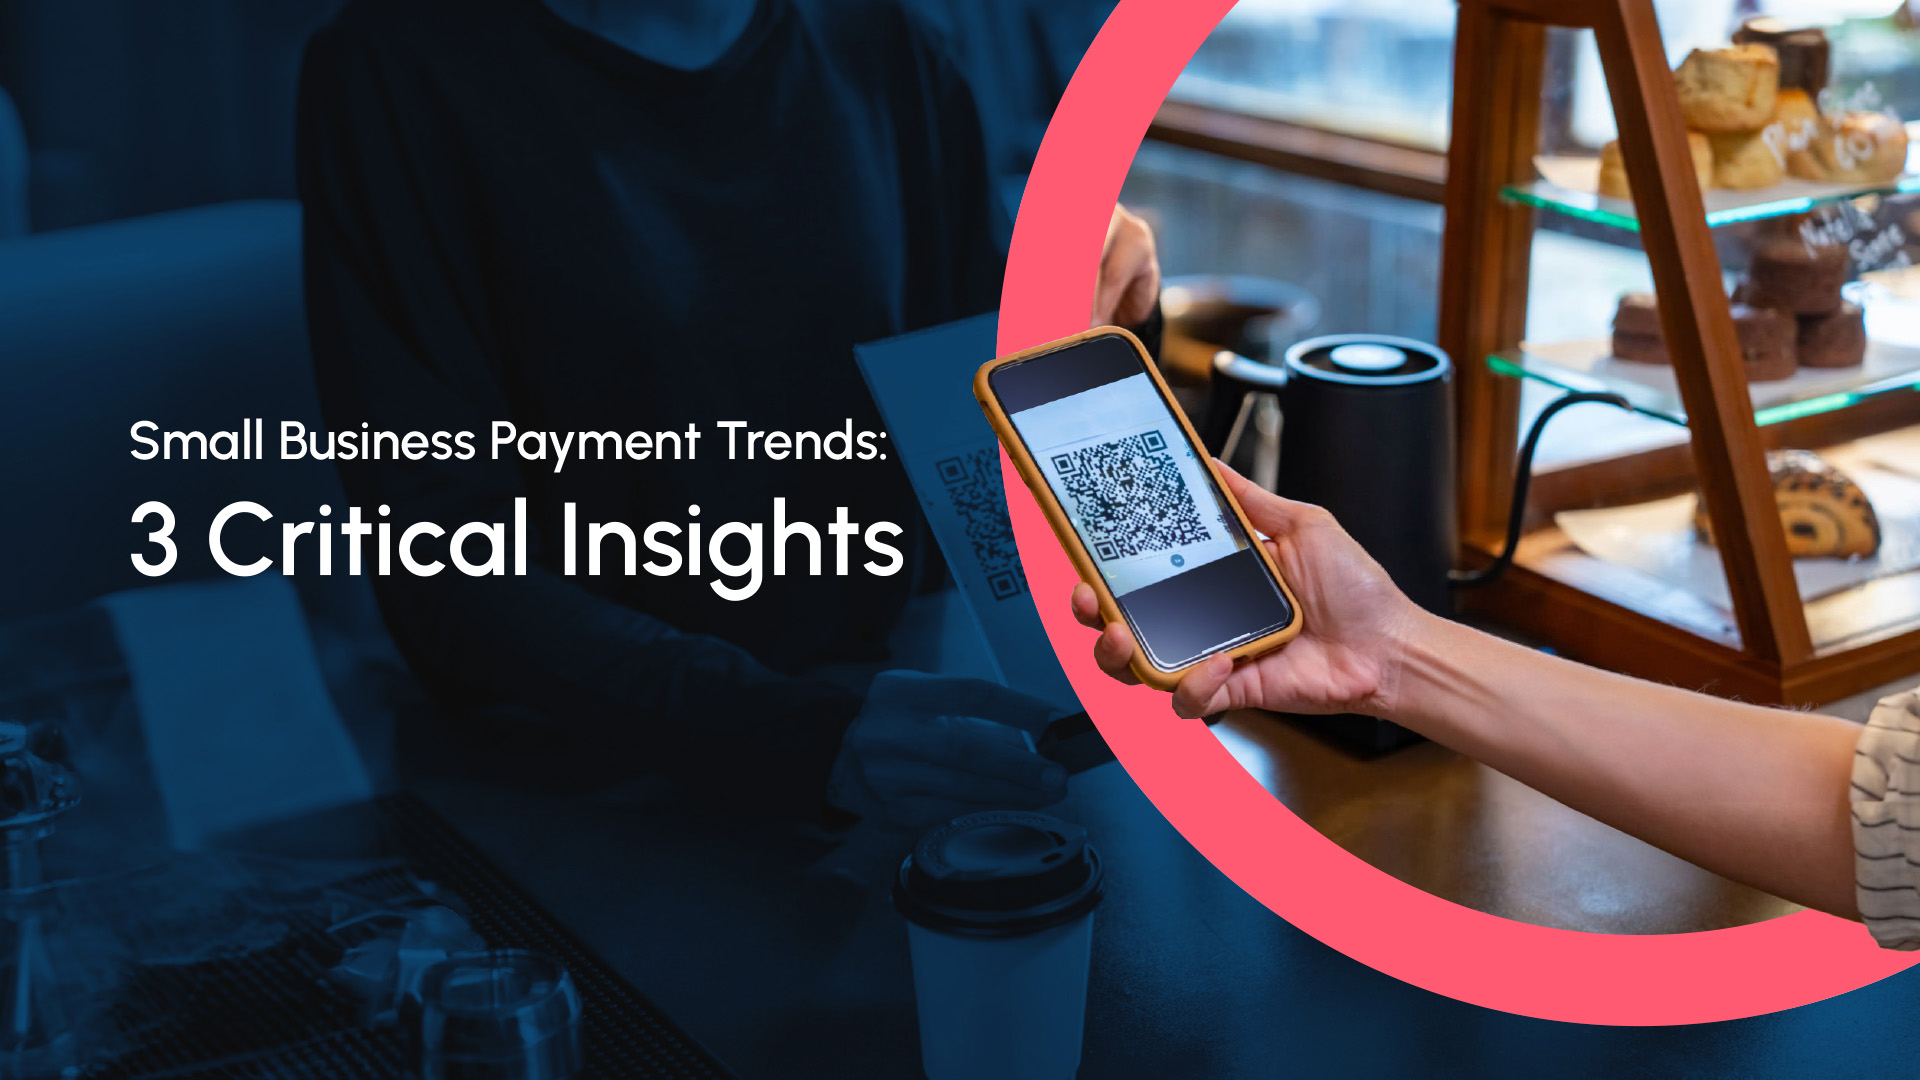 Small Business Payment Trends - 3 Critical Insights Blog hero image depicting a QR code payment with mobile phone